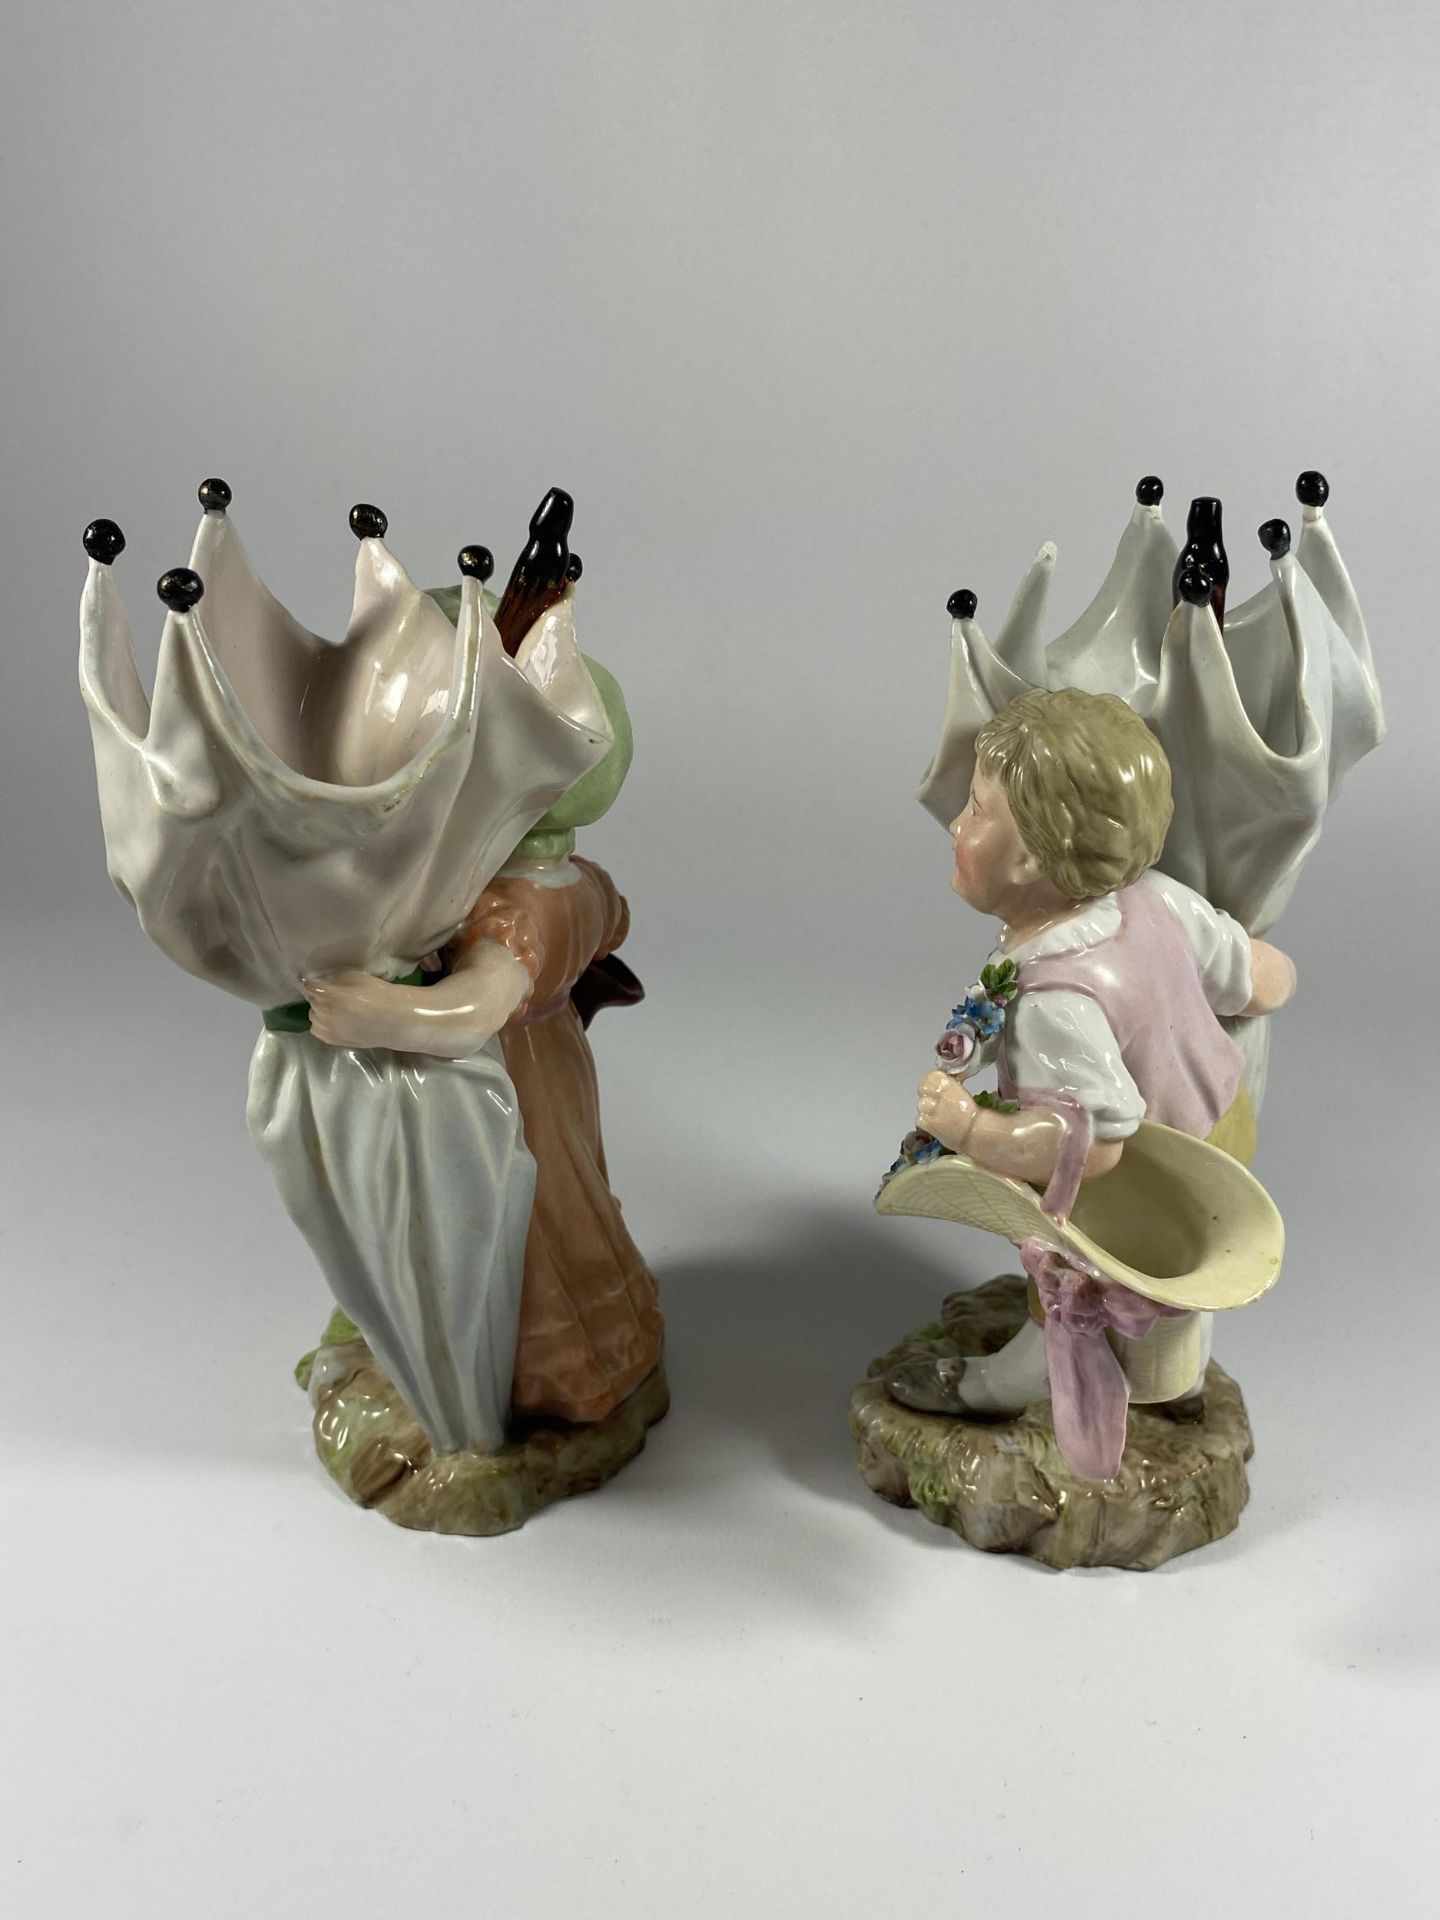 A PAIR OF 19TH CENTURY DRESDEN STYLE CONTINENTAL HARD PASTE PORCELAIN FIGURES WITH CROSSED SWORD - Image 3 of 4